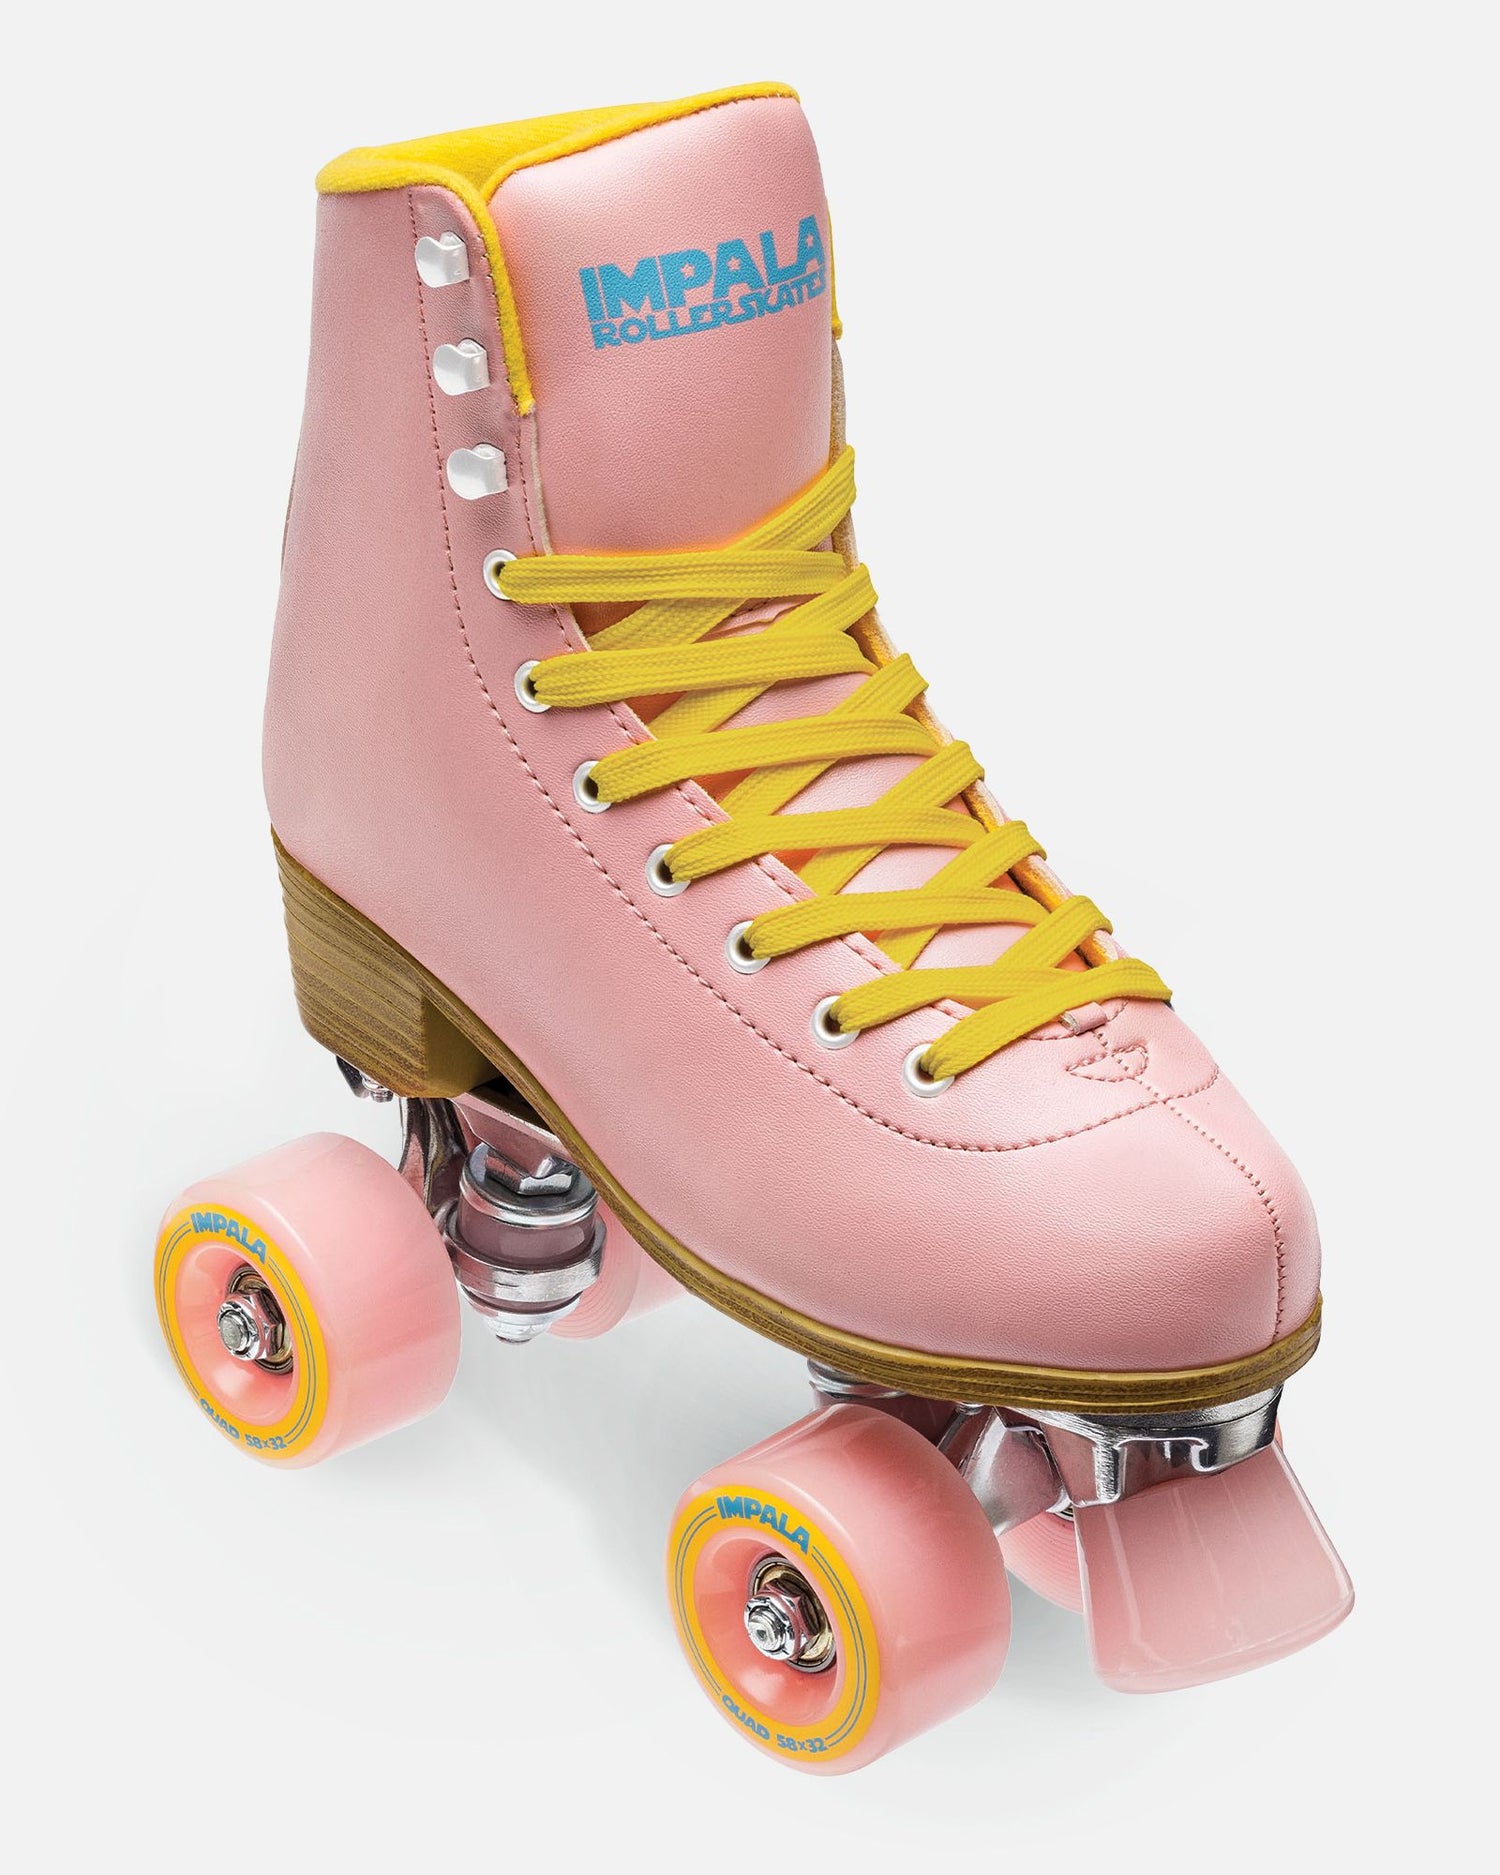 Front angled of Impala Quad Skate - Pink/Yellow